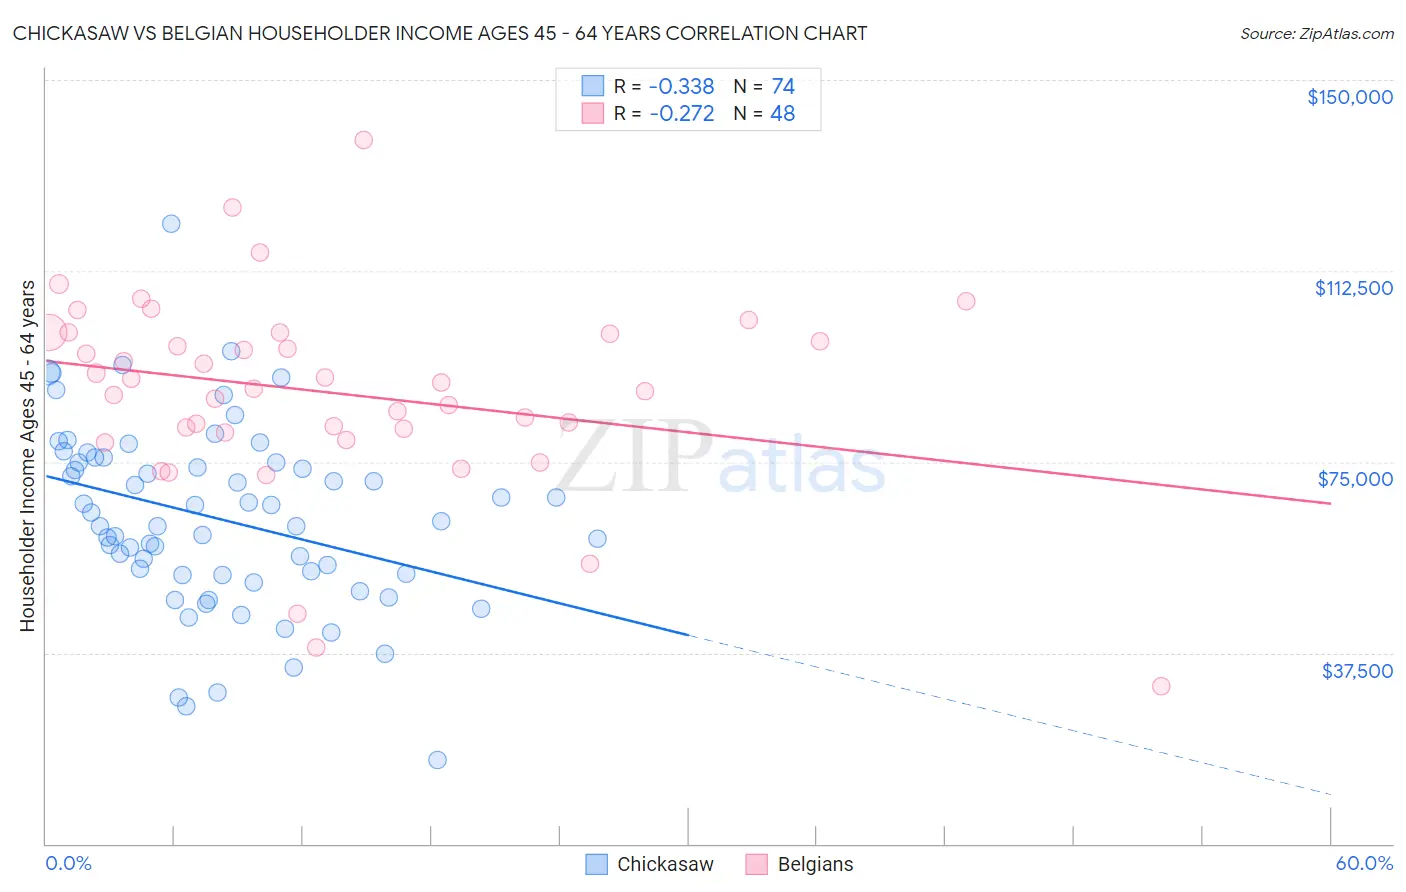 Chickasaw vs Belgian Householder Income Ages 45 - 64 years